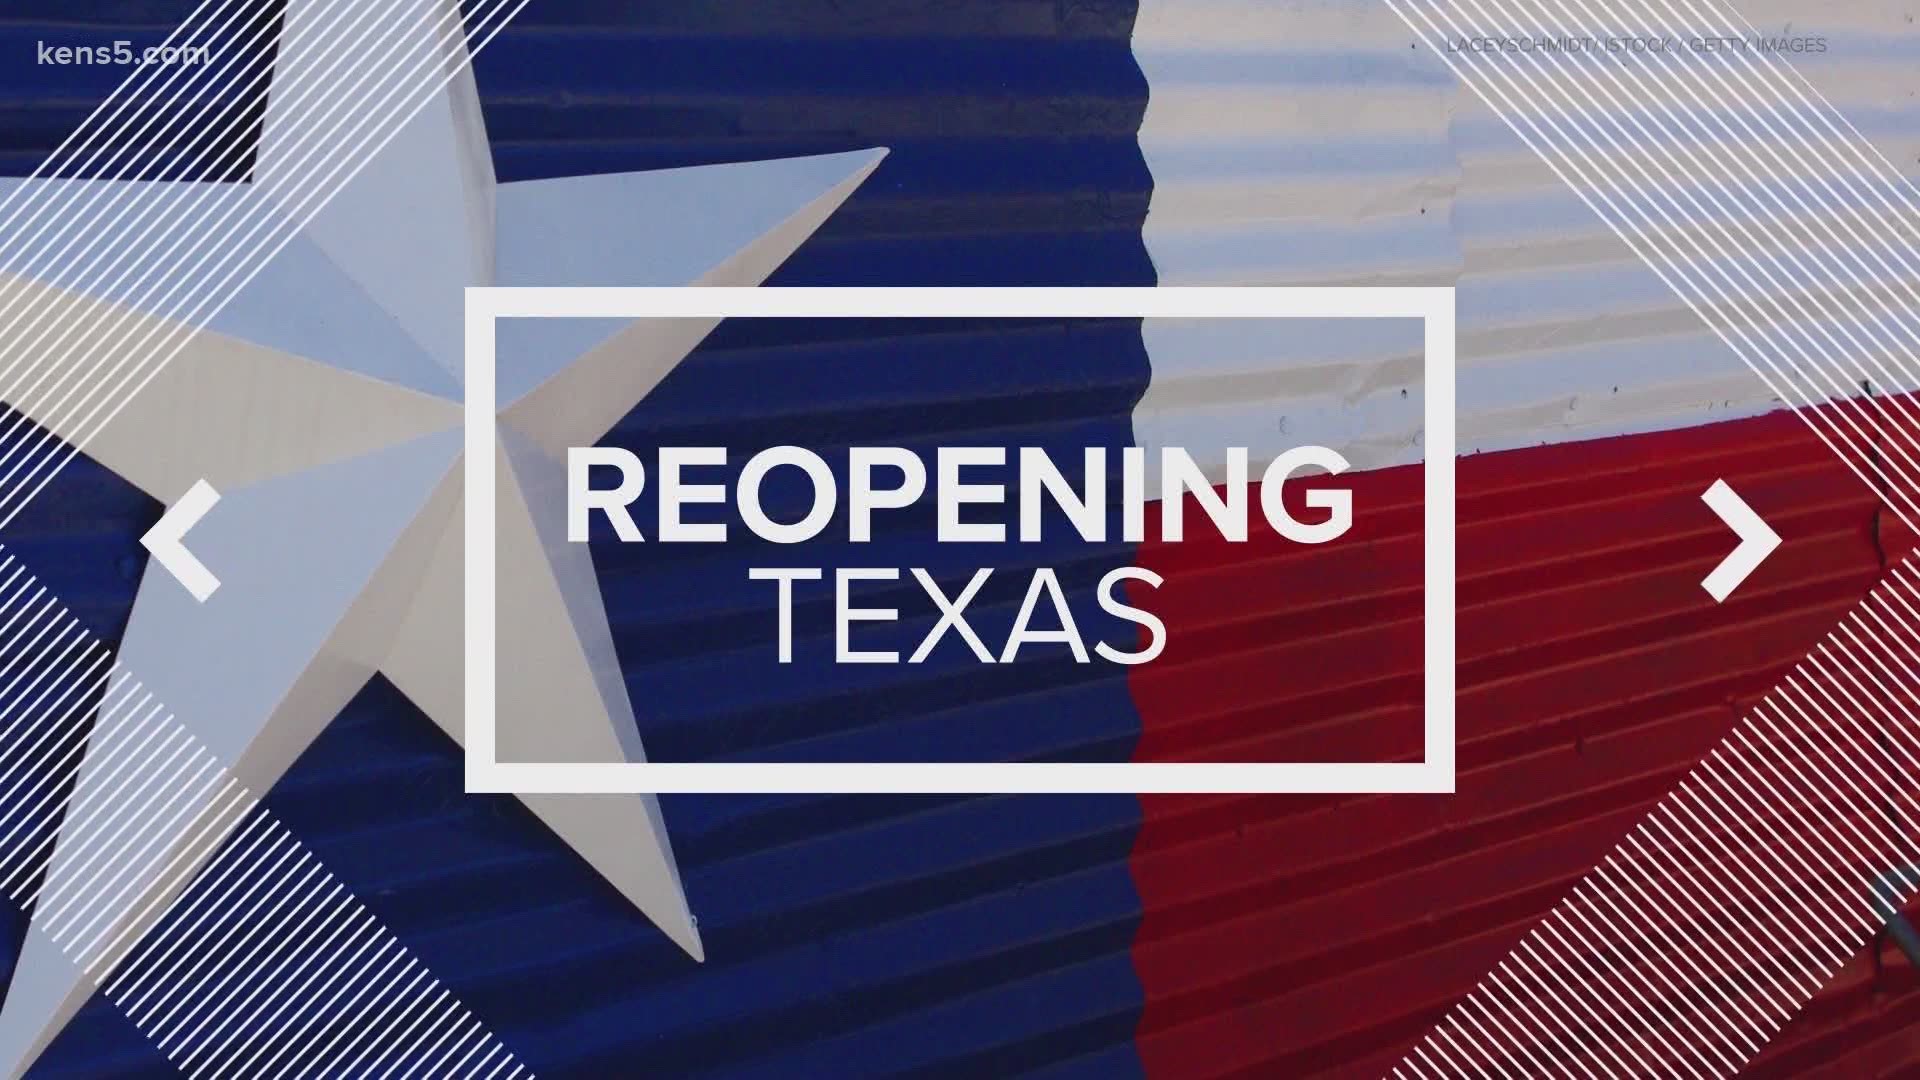 The next step in reopening Texas officially begins today. Here's what that will mean for restaurants, businesses and you.